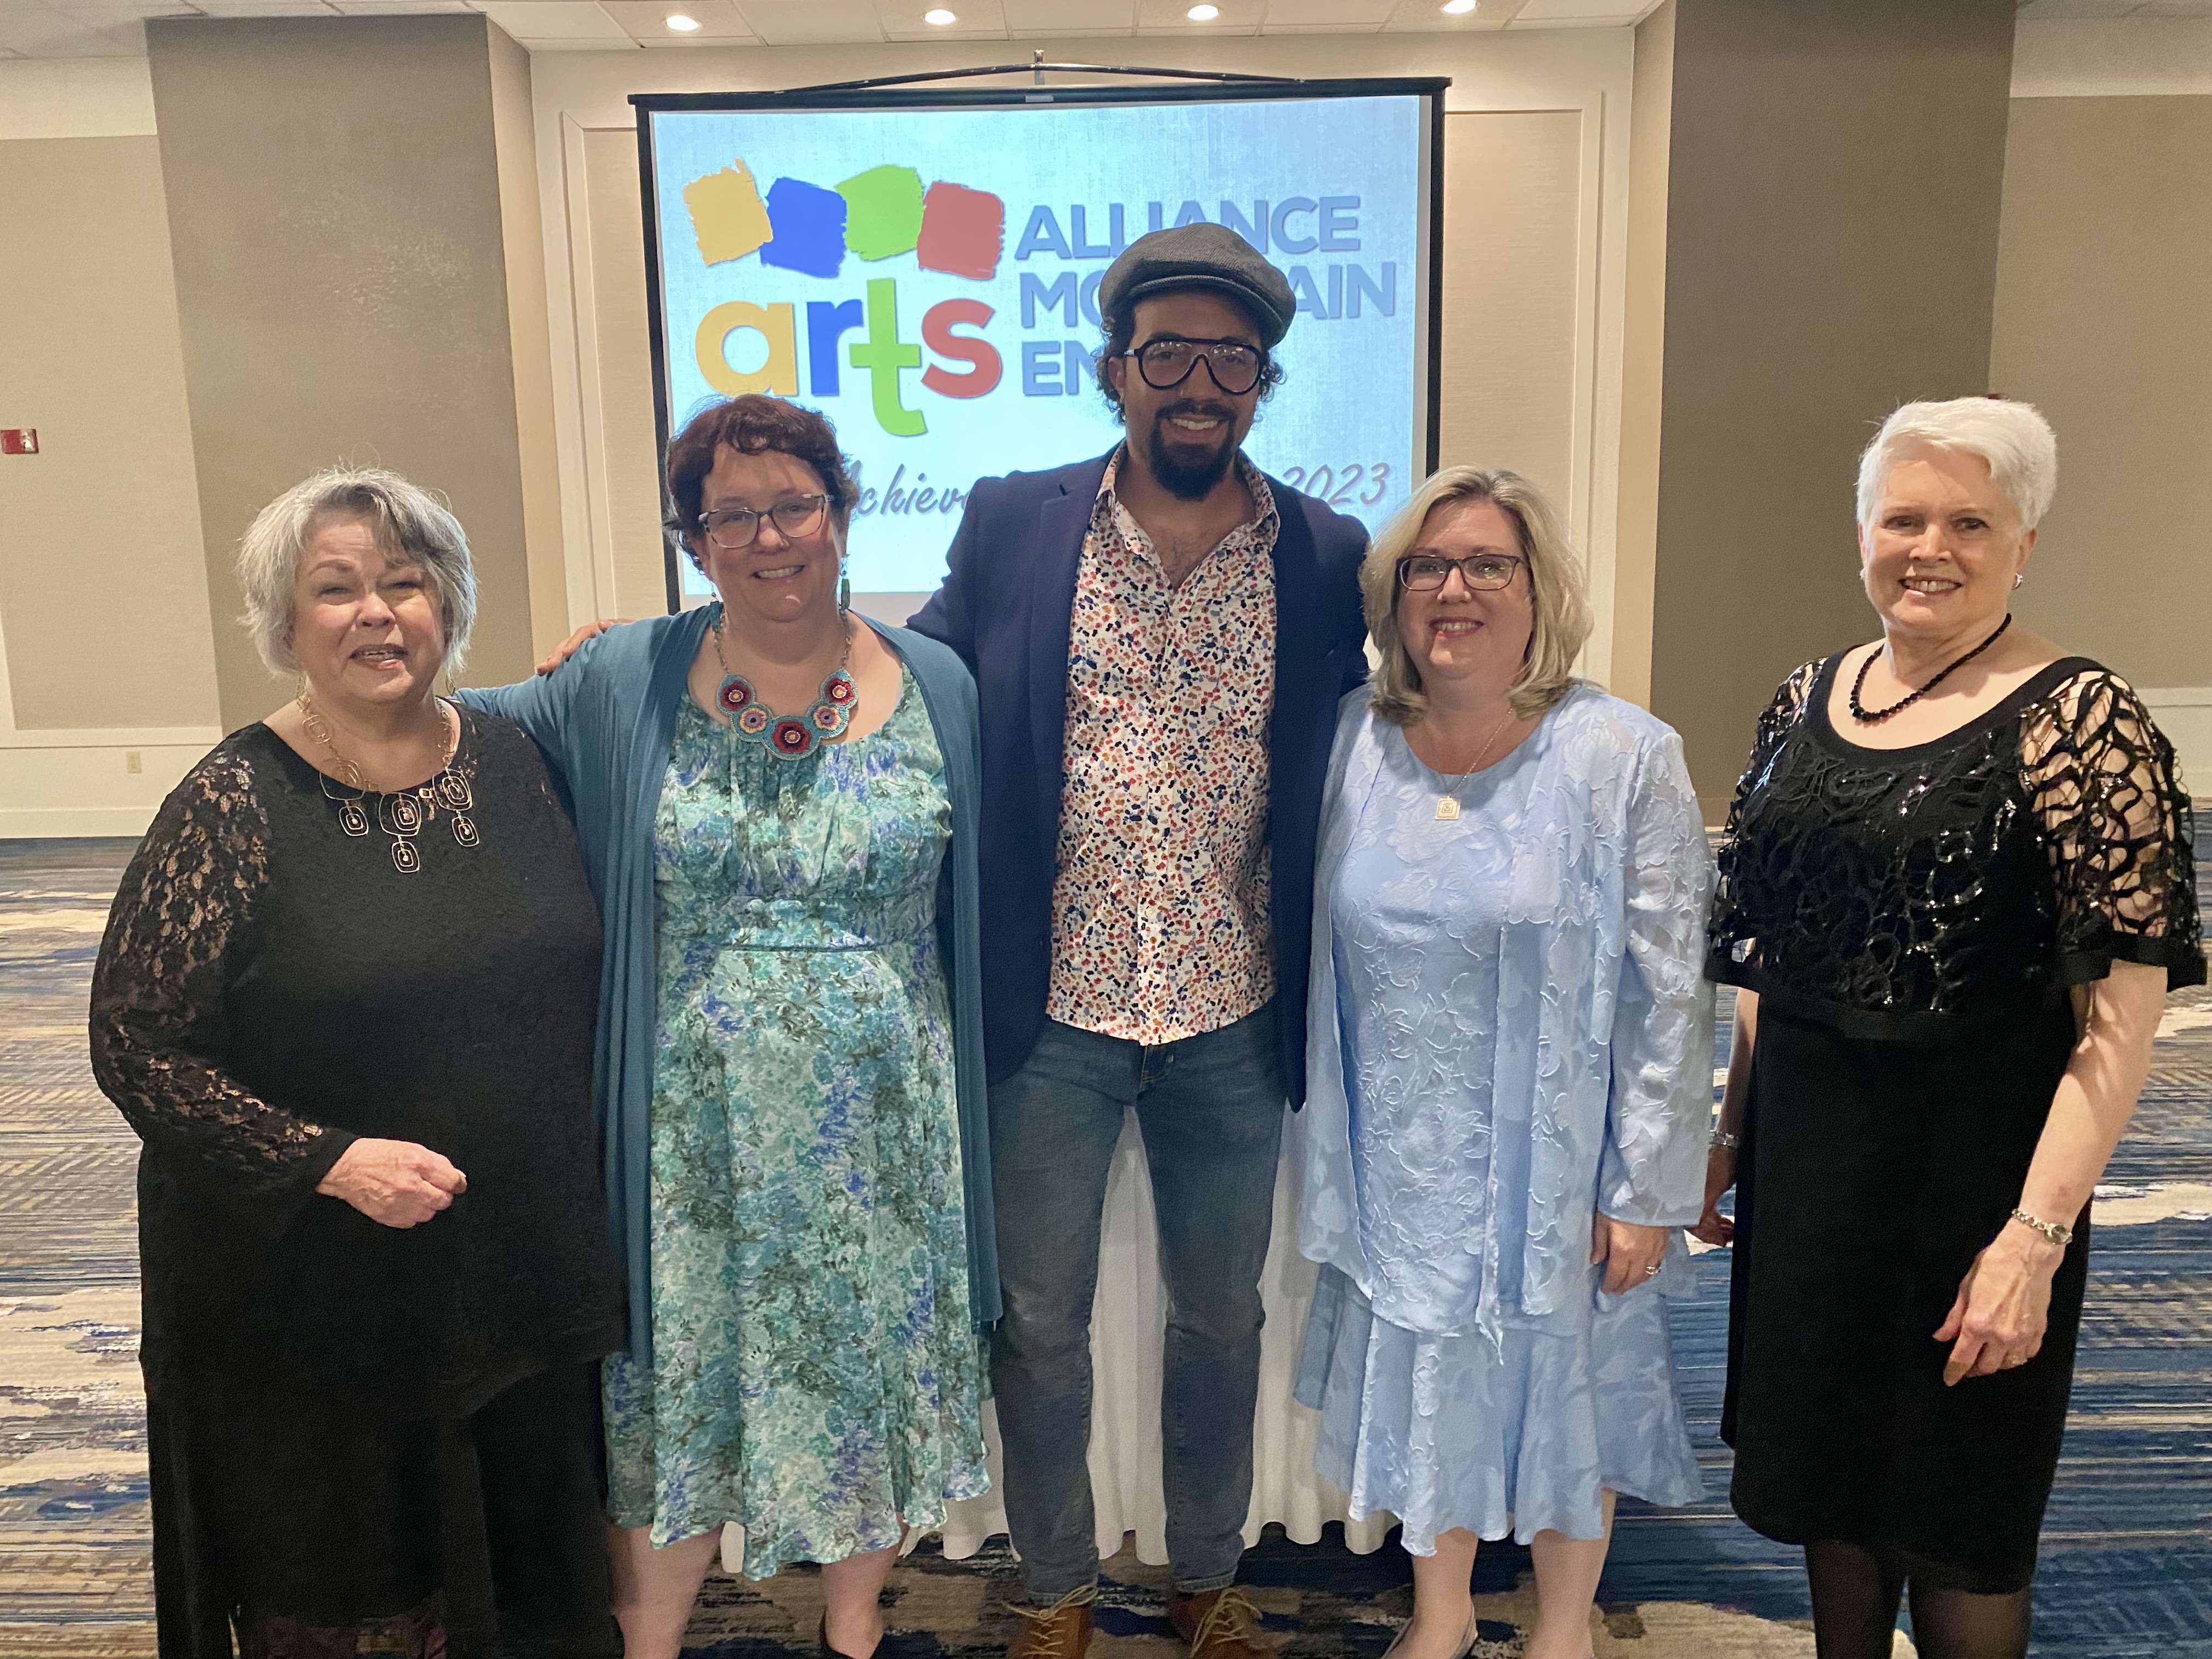 Winners of the AAME Arts Achievement Awards are from left to right: Dottie Havlik, Lisa Withers, Jason Flack, Kellie Brown and Ann Holler.